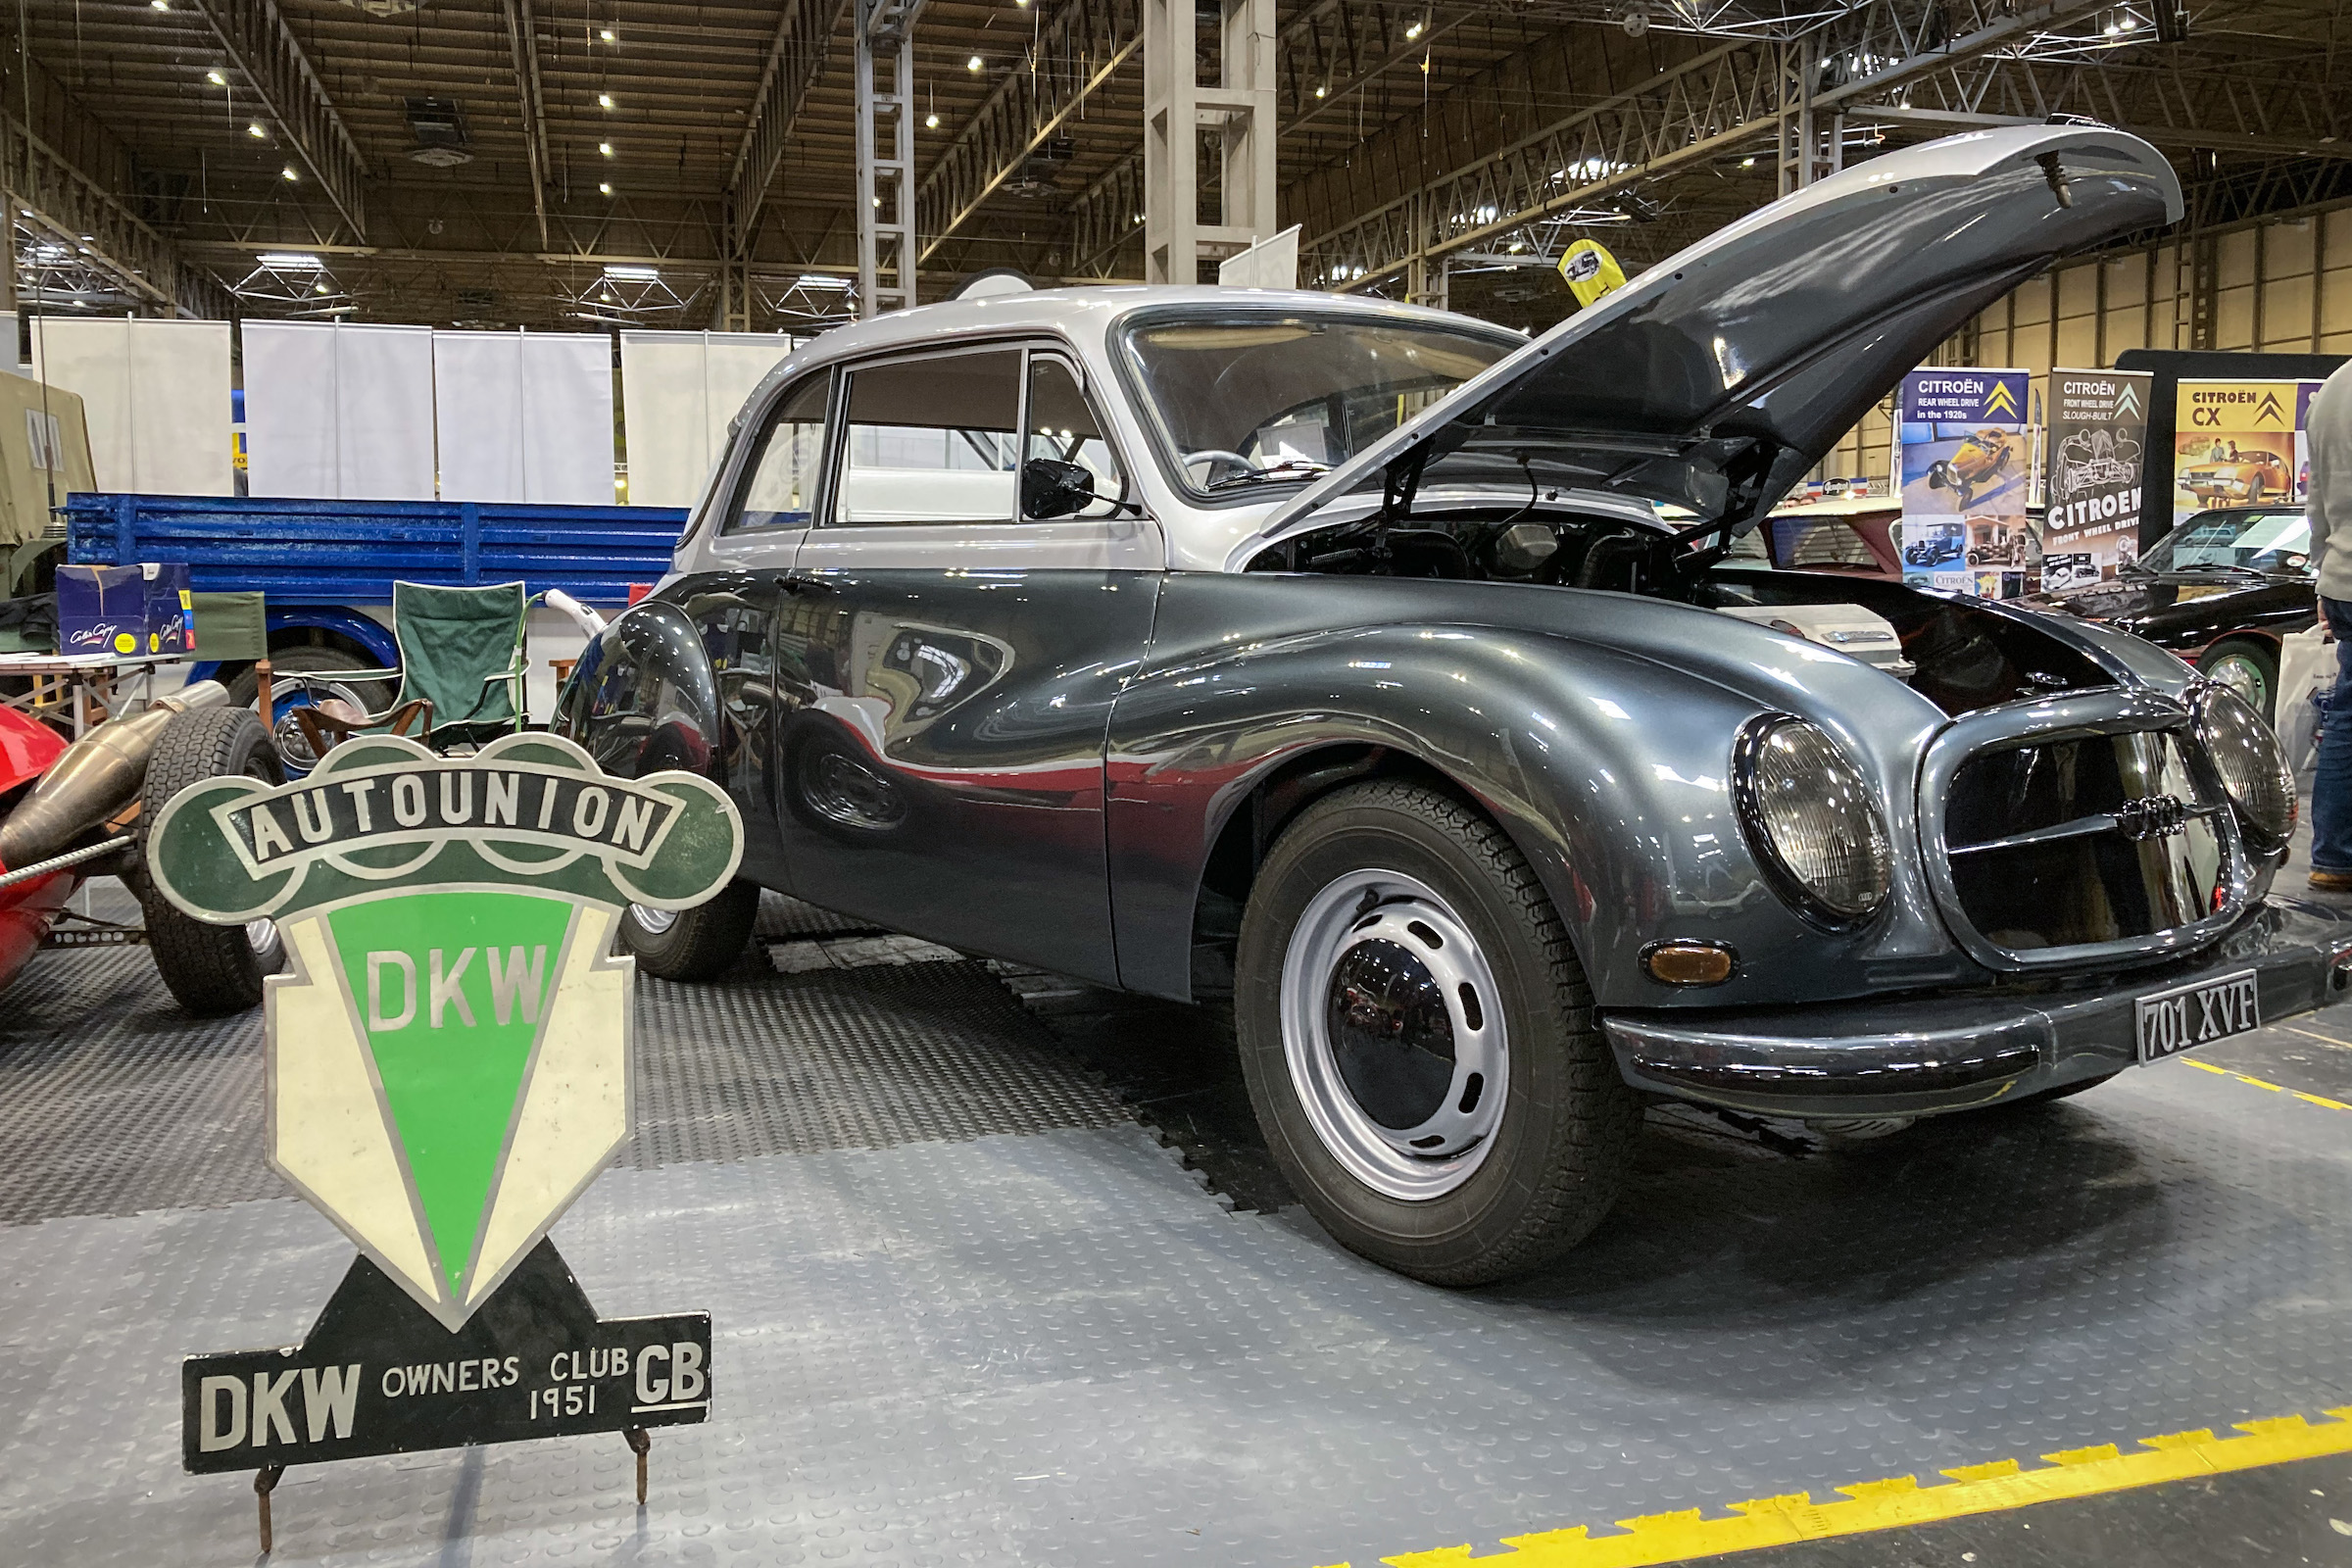 Why electric power was the answer when this 1958 DKW expired